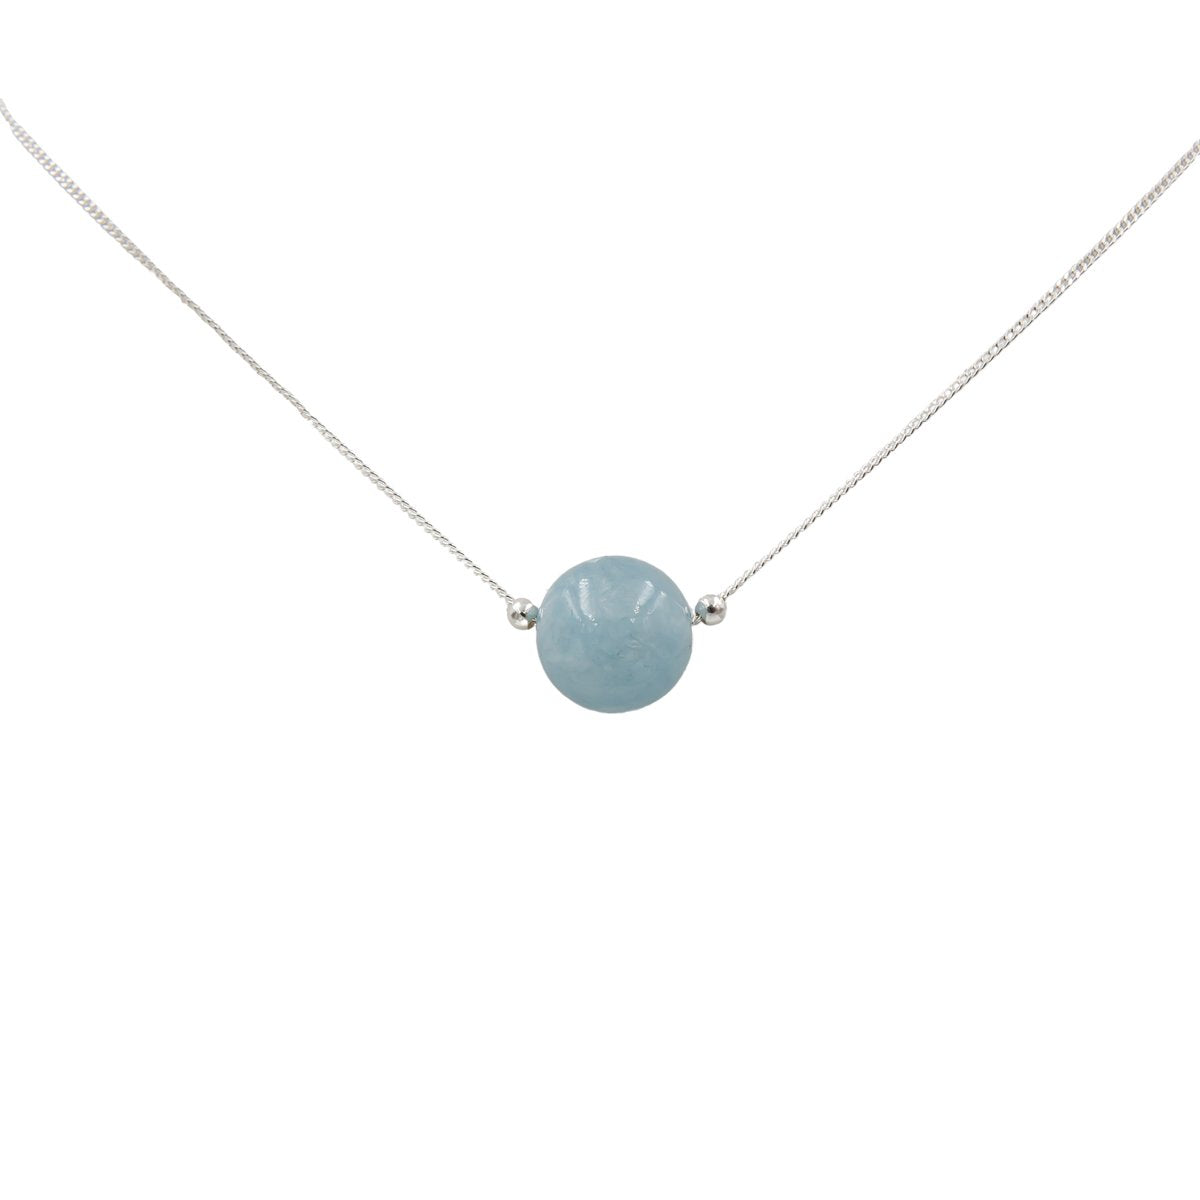 Buy Personalized March Birthstone Necklace Aquamarine Silver Necklace March  Jewelry March Gift Aquamarine Necklace Birthstone Jewelry Online in India -  Etsy